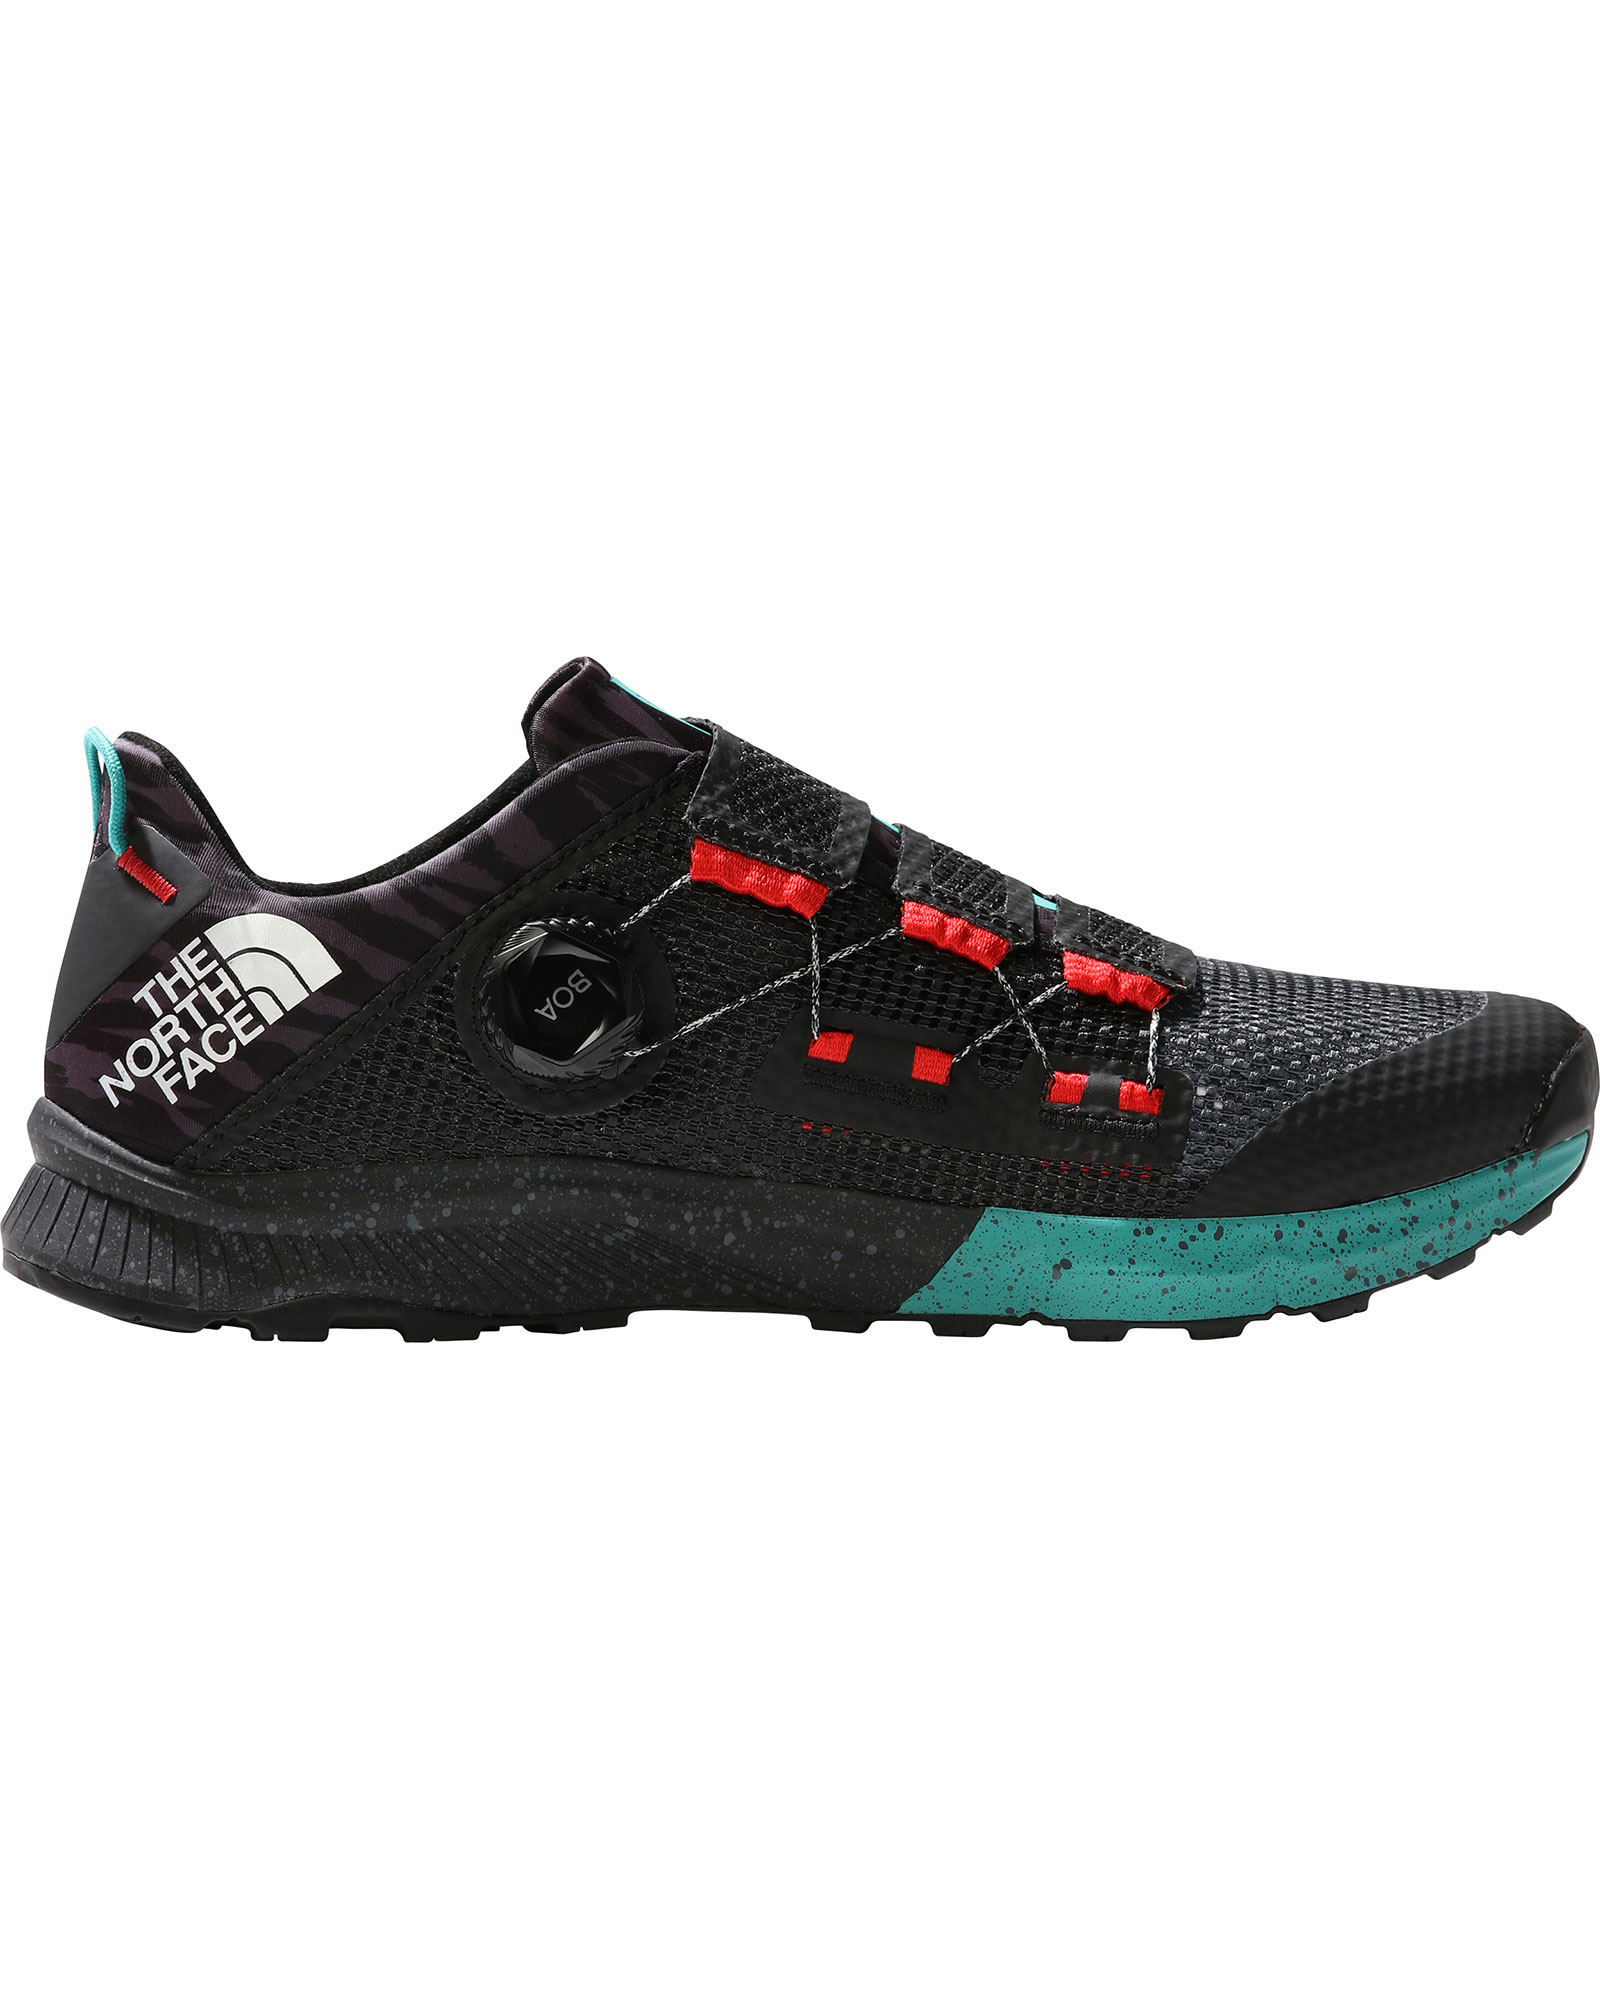 The North Face Summit Cragstone Pro Men’s Shoes - TNF Black/TNF Red UK 10.5